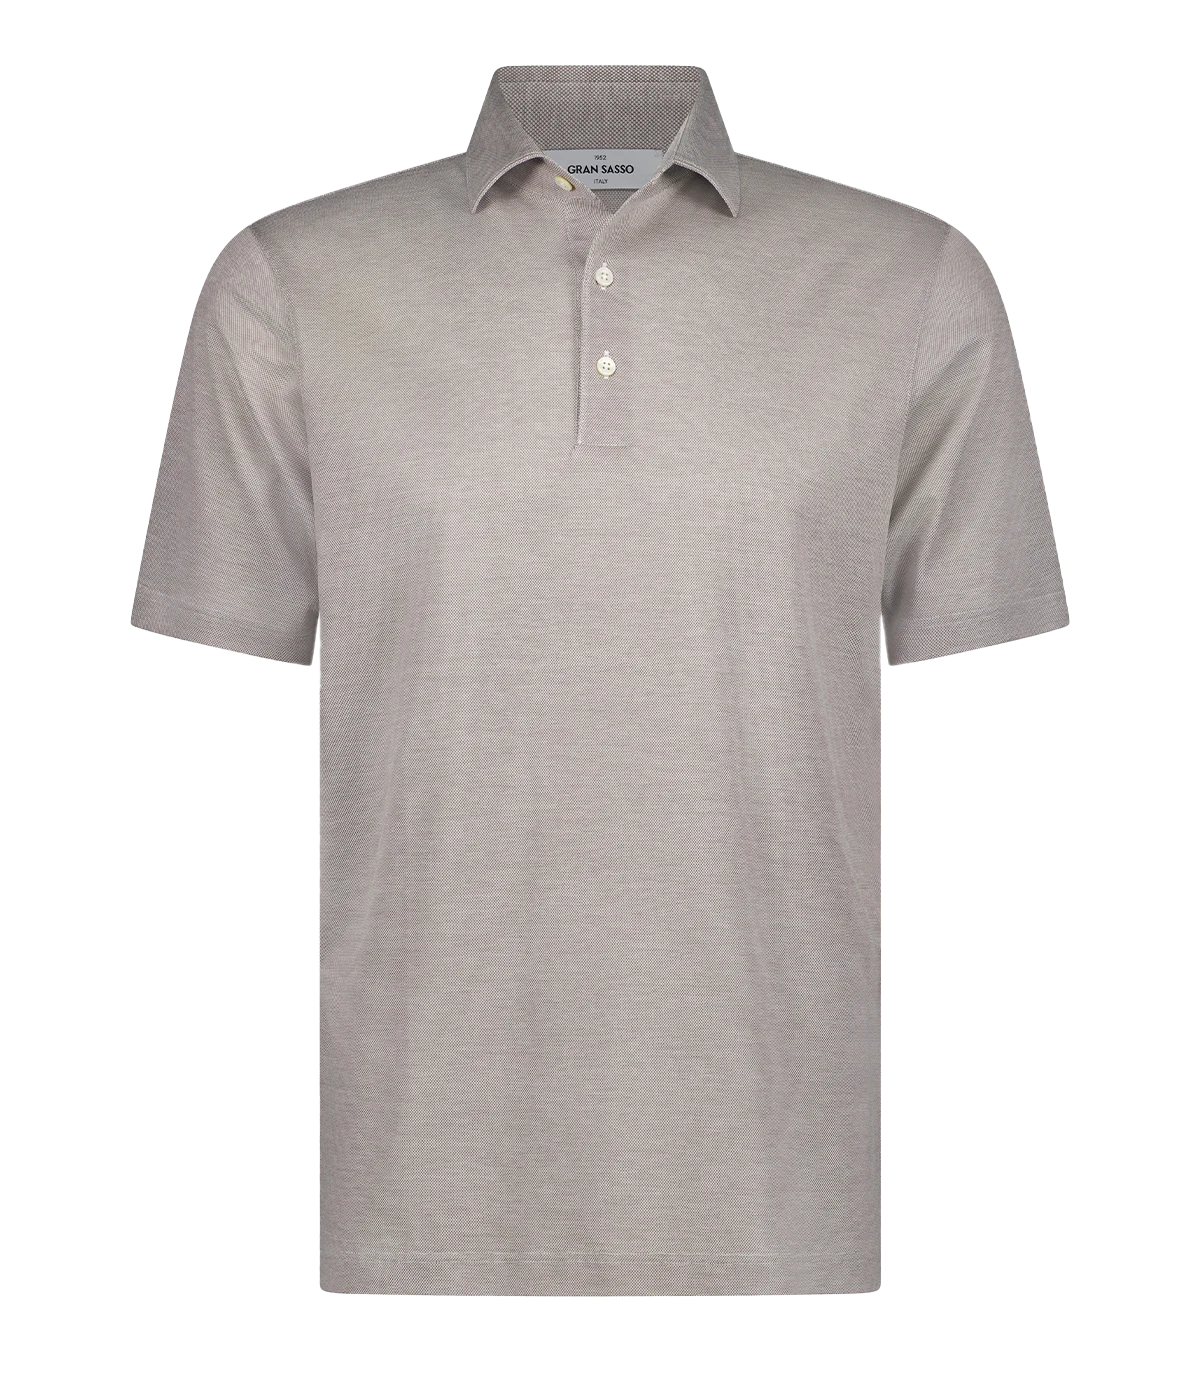 A timeless classic short sleeve polo in taupe, featuring a light weight cotton material, three button detail and collar. Sporty Polo, comfortable, made in Italy, throw on and go. 